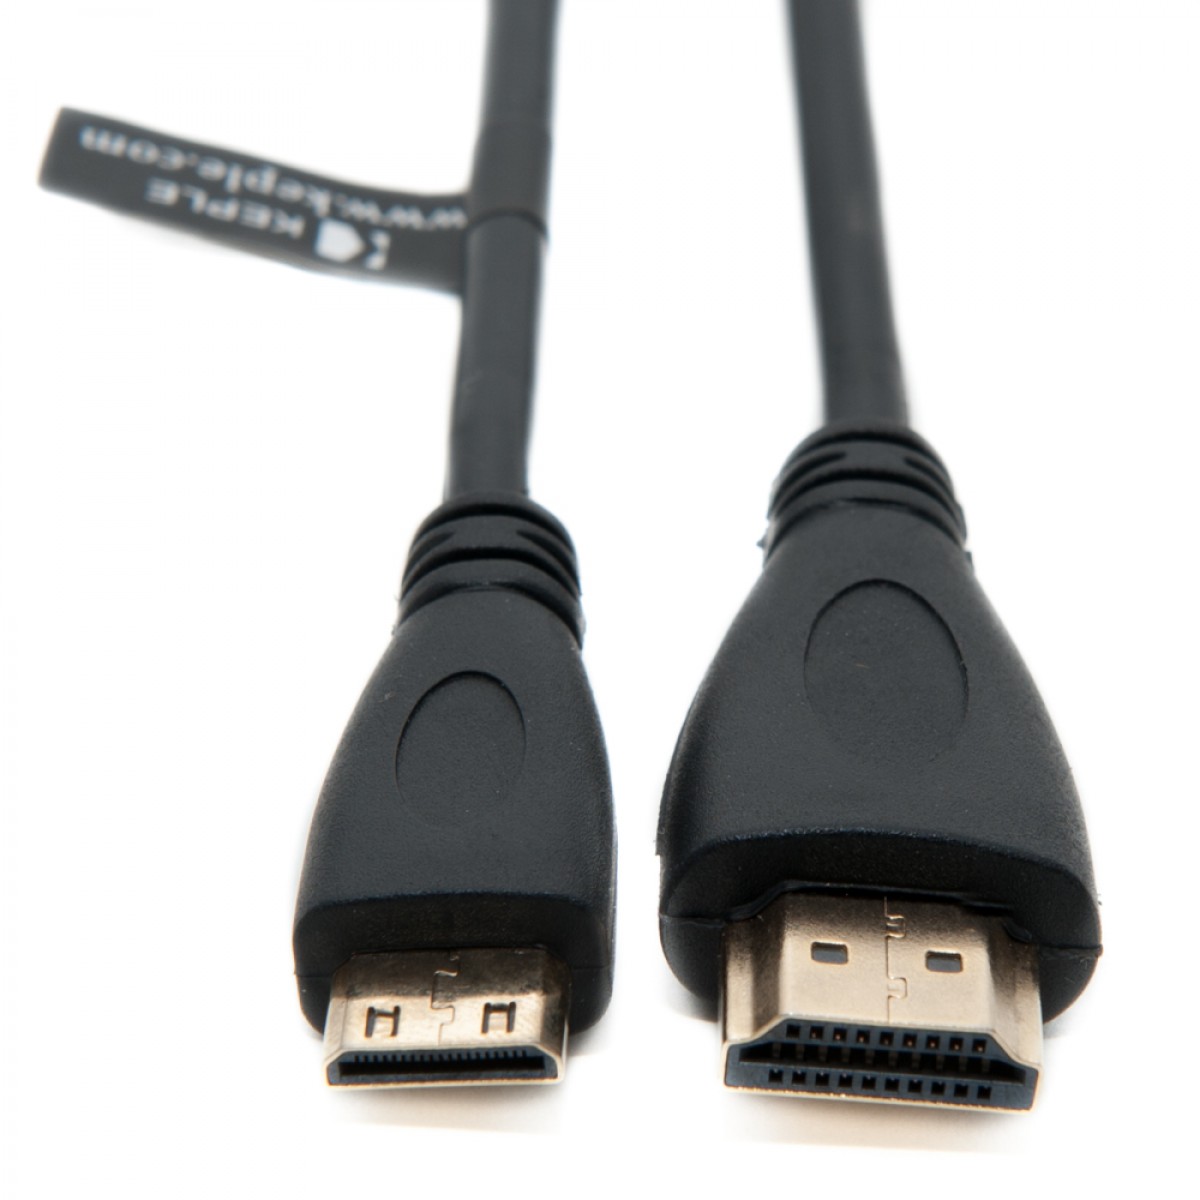 1m Mini Type-C HDMI to HDMI 1.4 Cable for Nikon COOLPIX P520 Camera